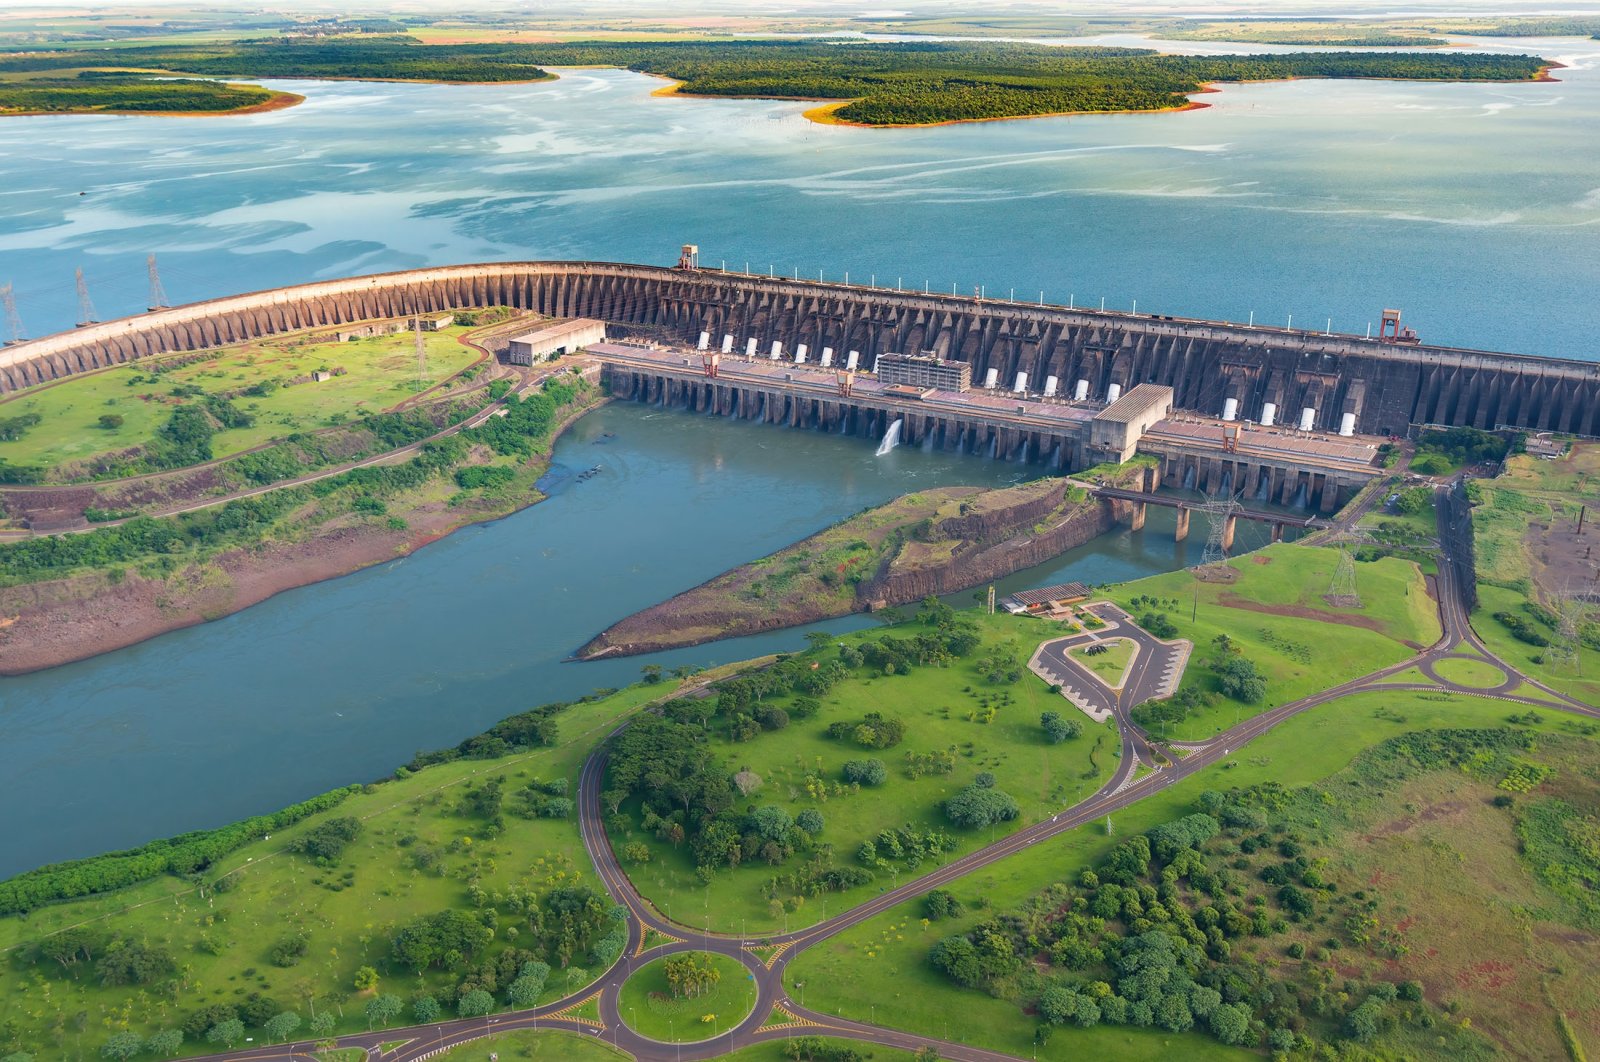 An aerial view shows the Itaipu Hydroelectric Dam on the Parana River, located on the border between Brazil and Paraguay. (Shutterstock Photo)